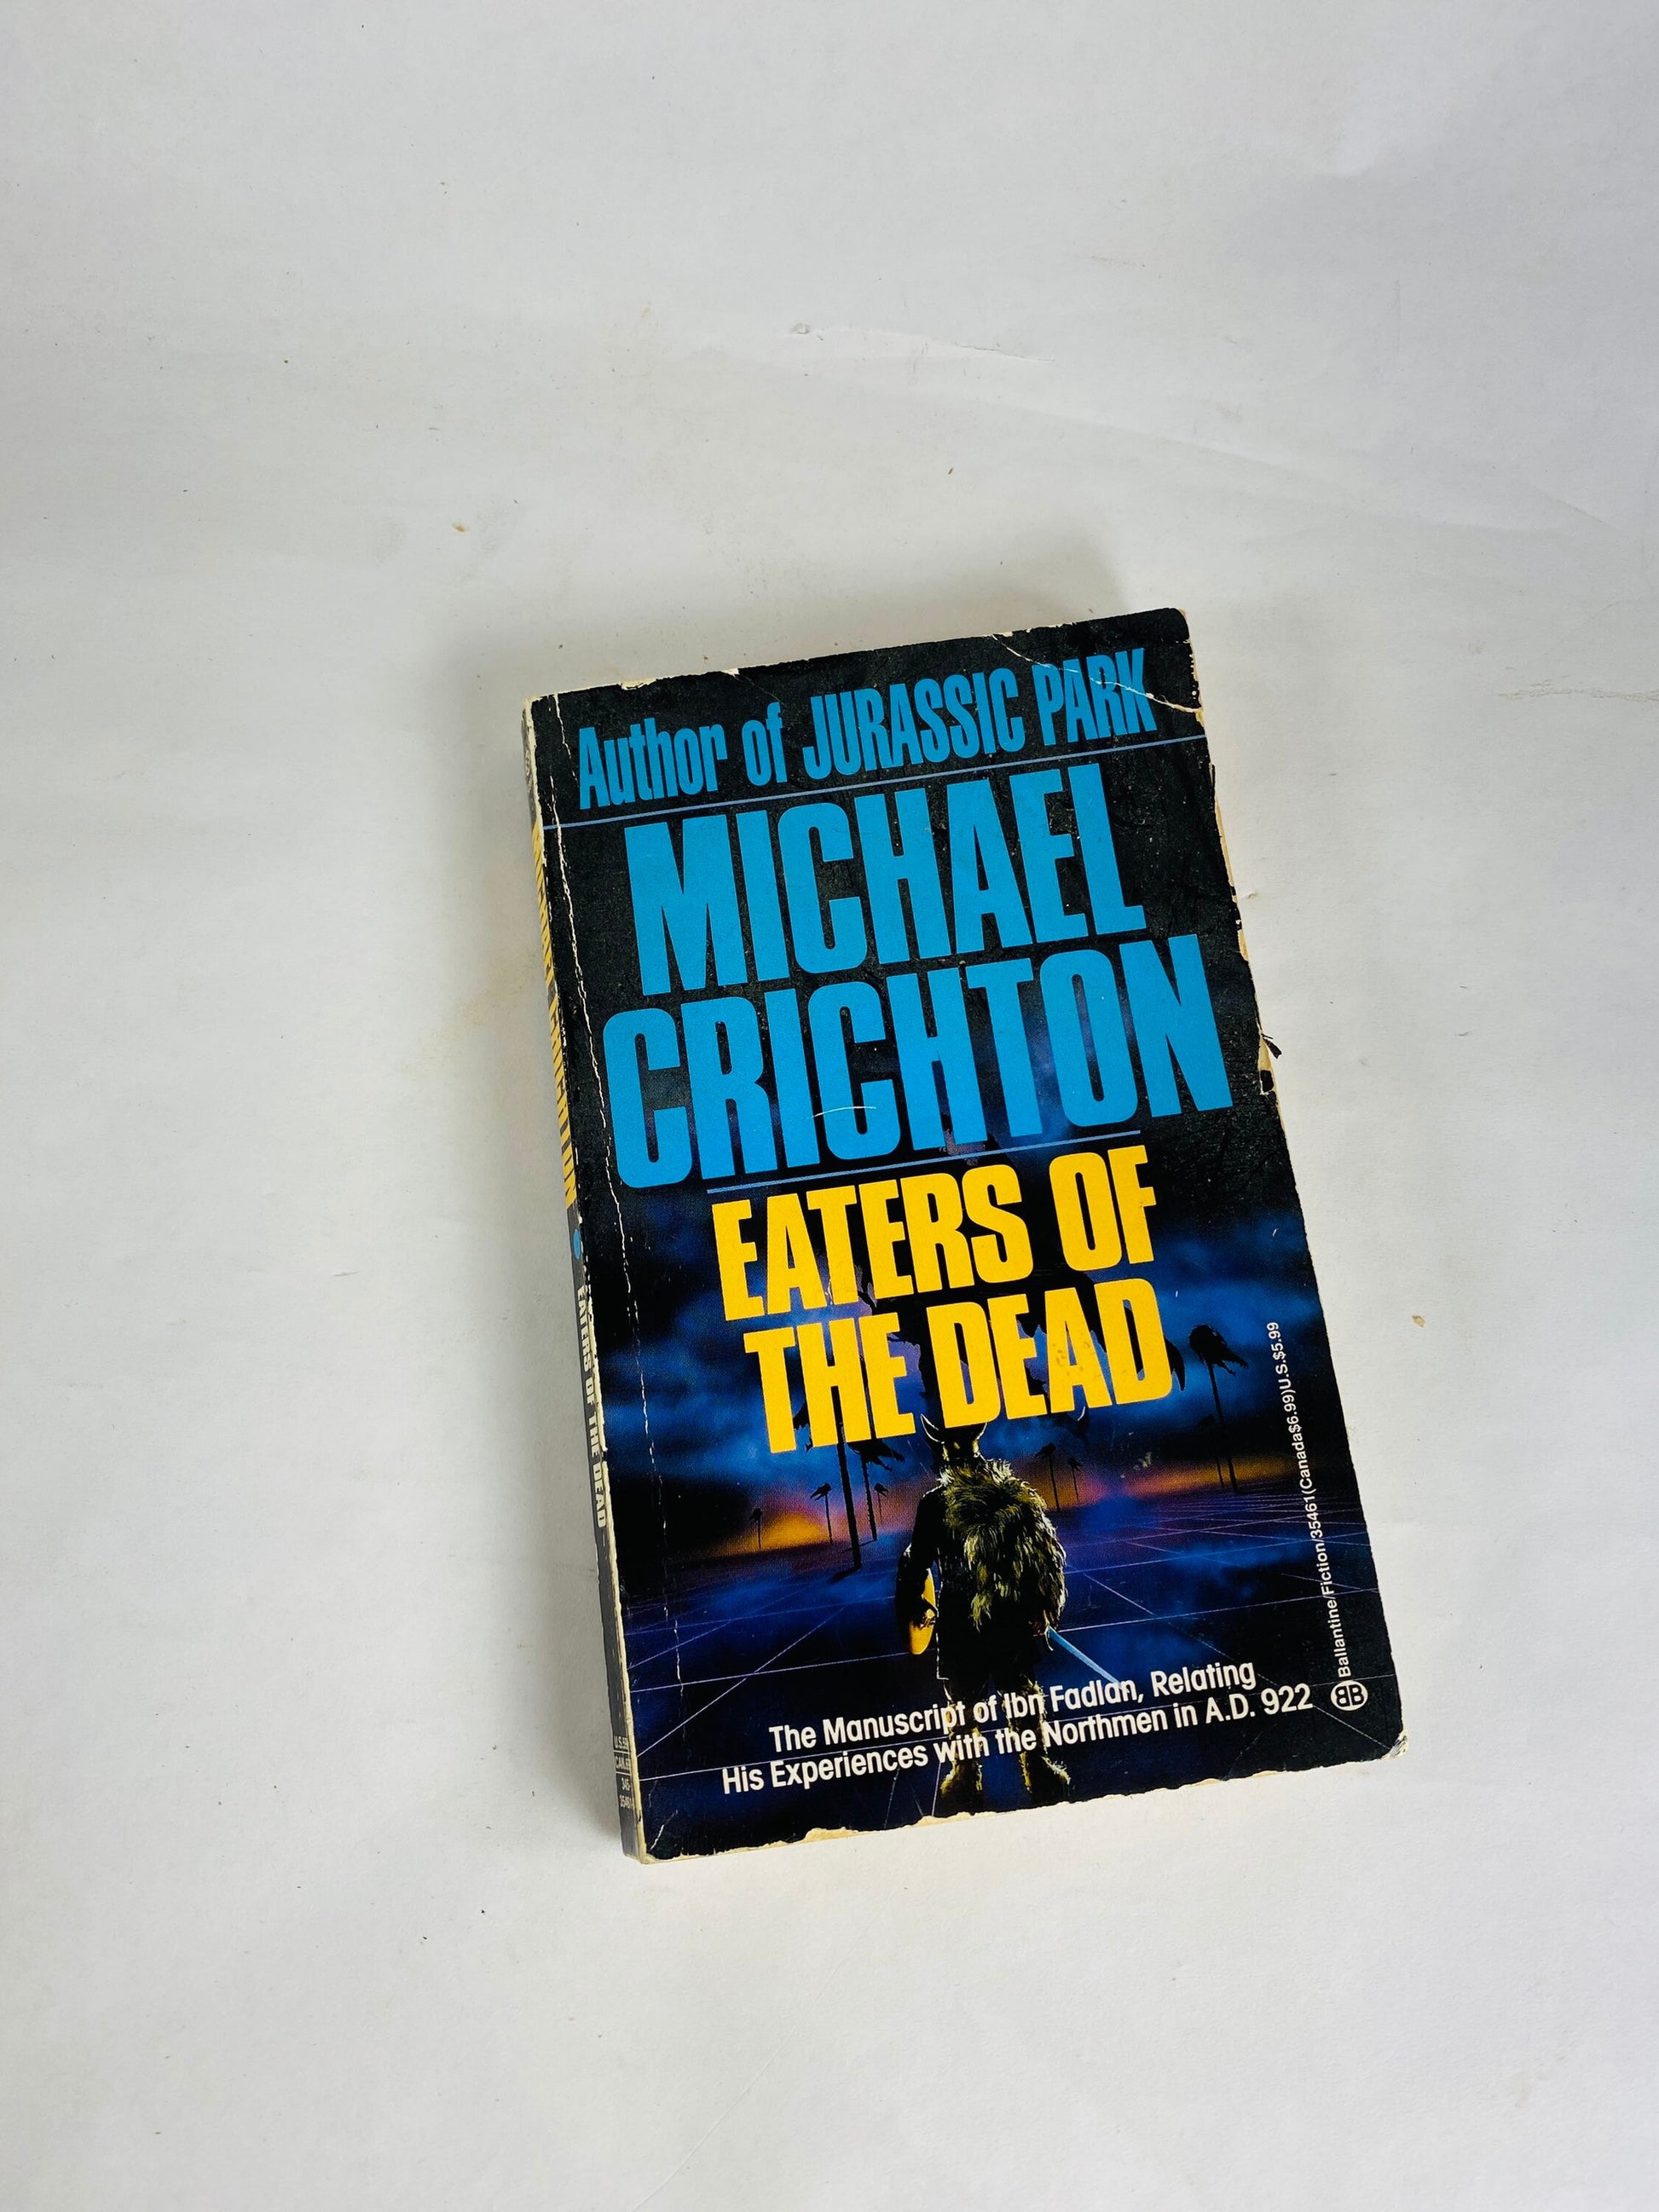 Eaters if the Dead by Michael Crichton Early PRINTING vintage paperback book circa 1991